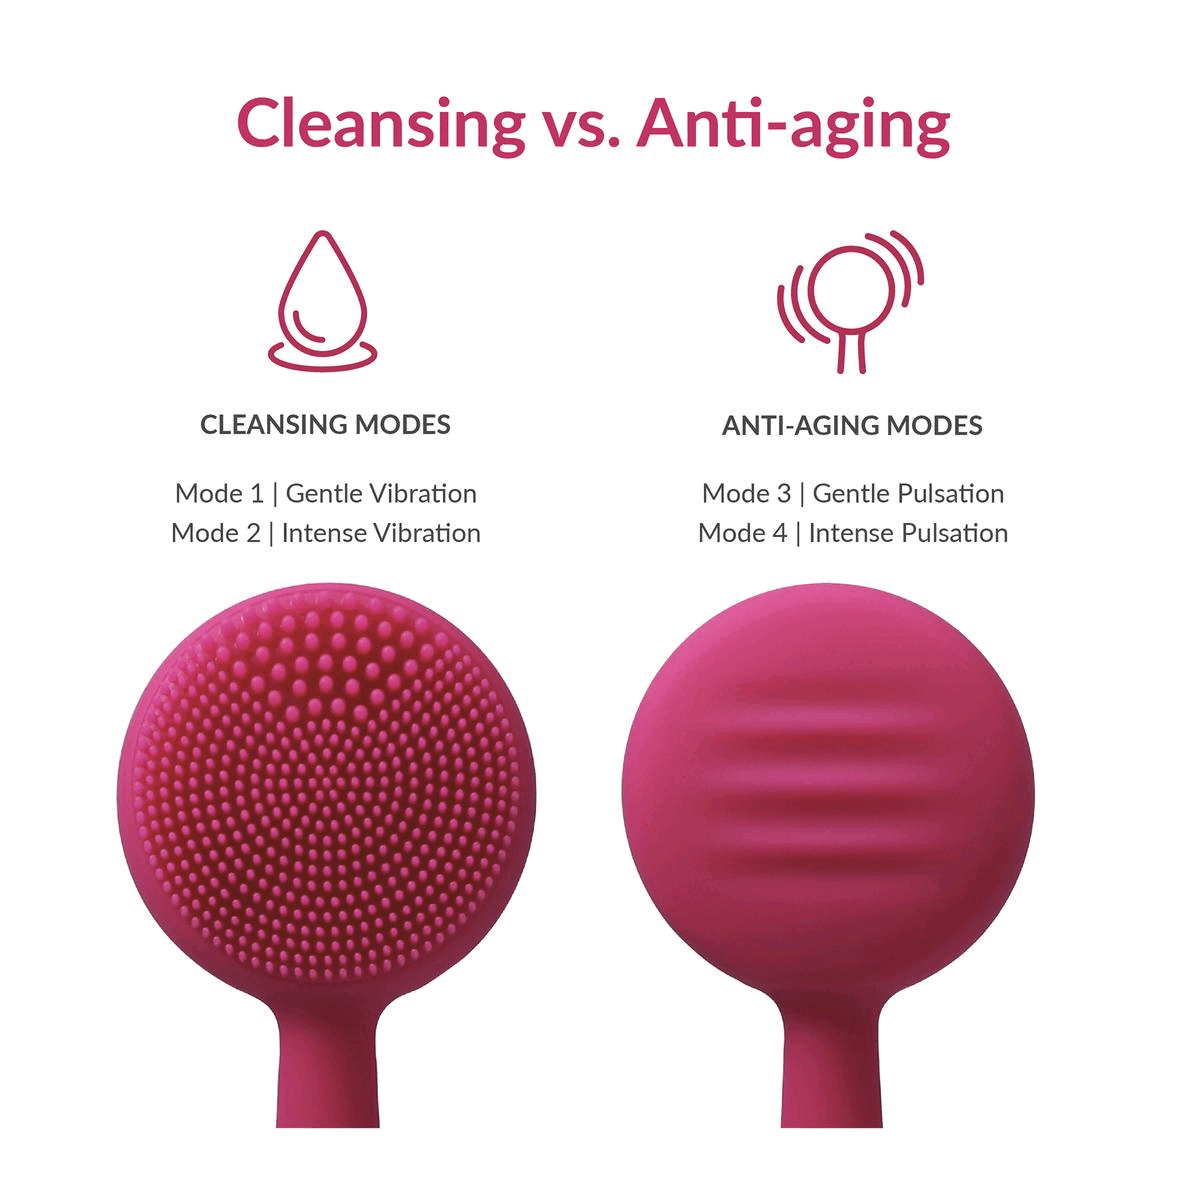 Image 1, cleansing vs anti-aging. Image 2, key features. Image 3, tips and tricks